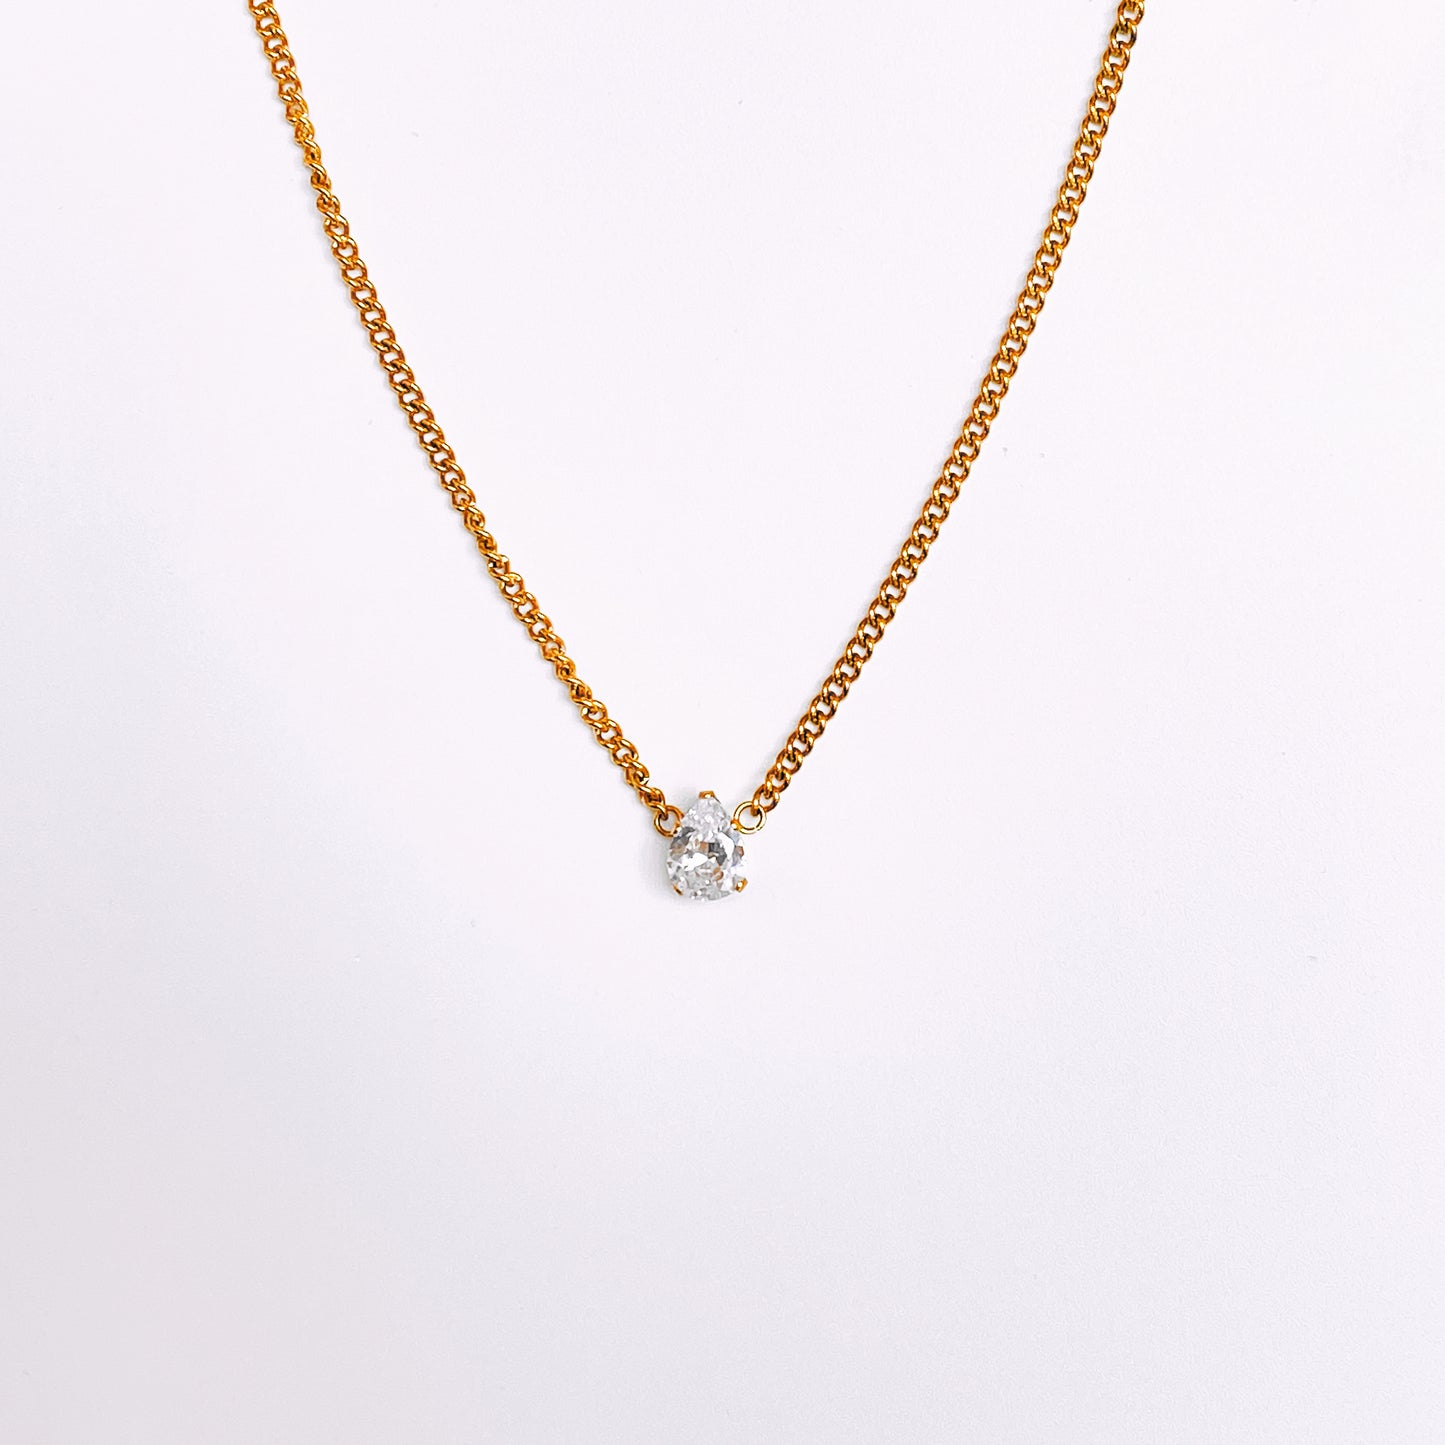 MINIMALIST NECKLACE WITH SHINY WATERDROP